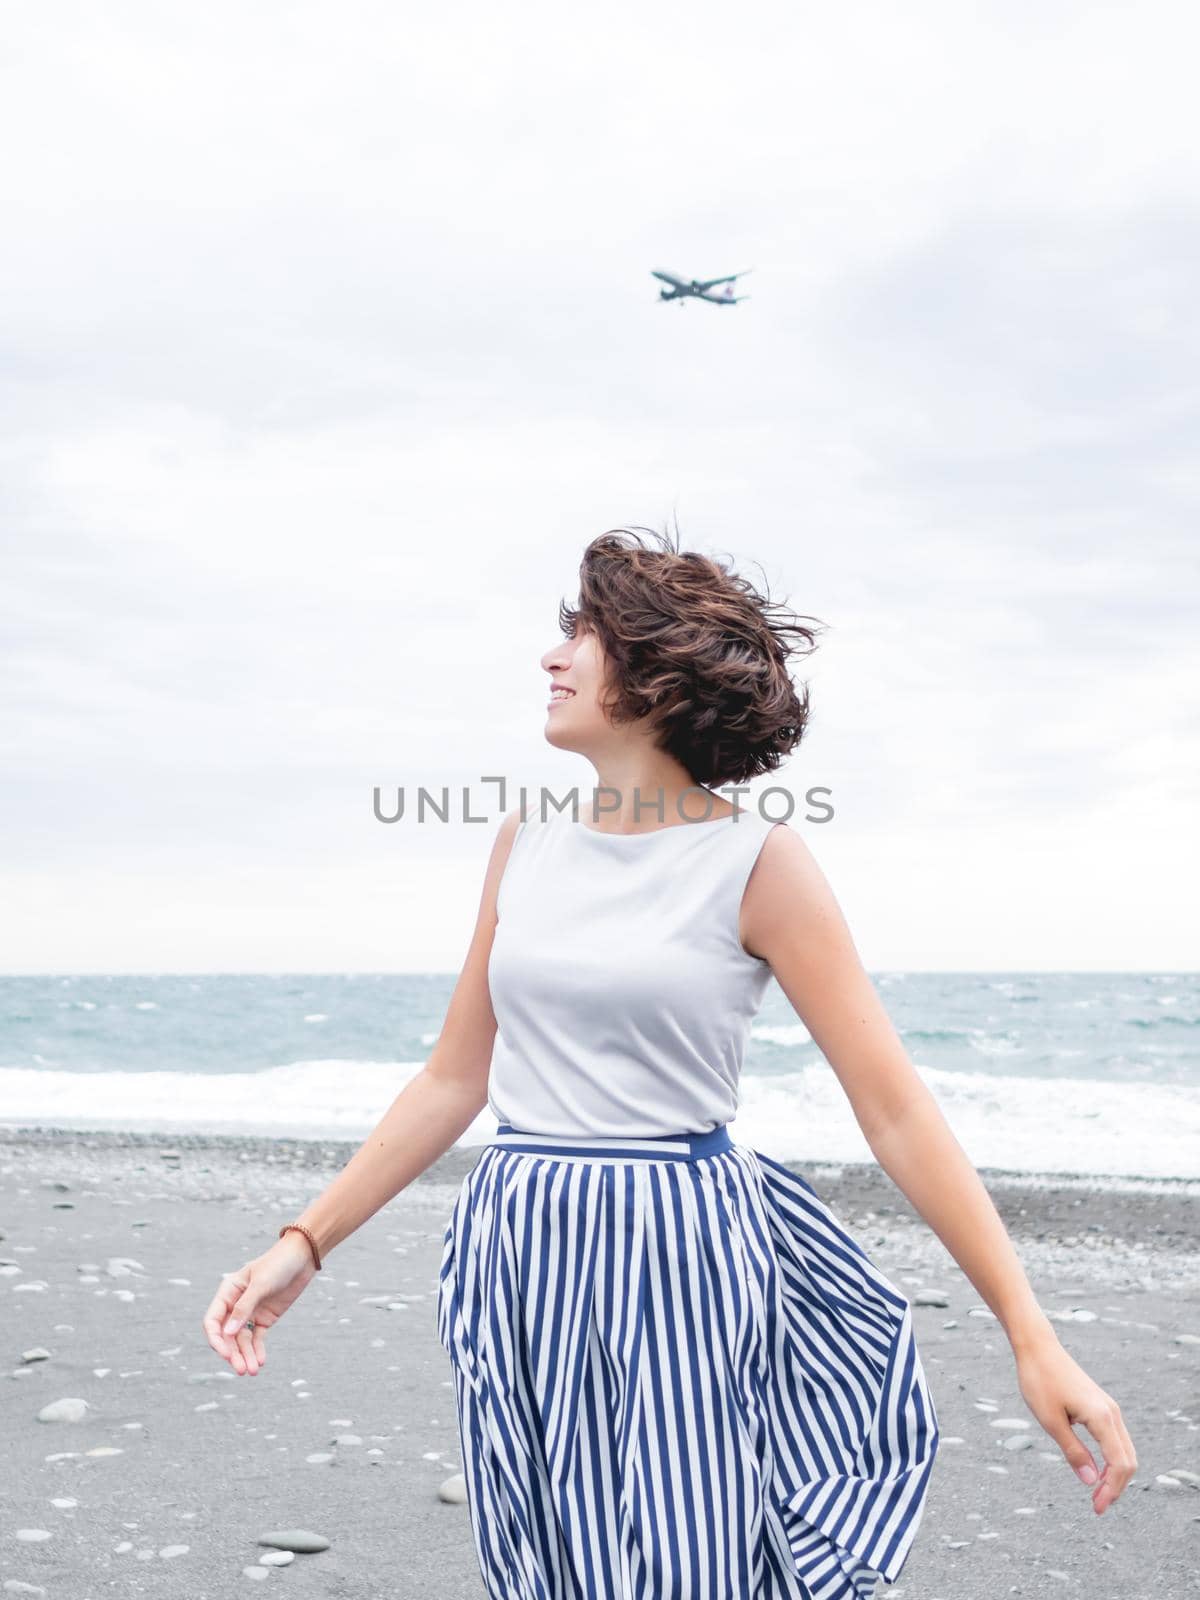 Plane flies in cloudy sky over smiling woman on seaside. Woman with hair ruffled with the wind. Wanderlust concept. Vacation on sea coast. by aksenovko